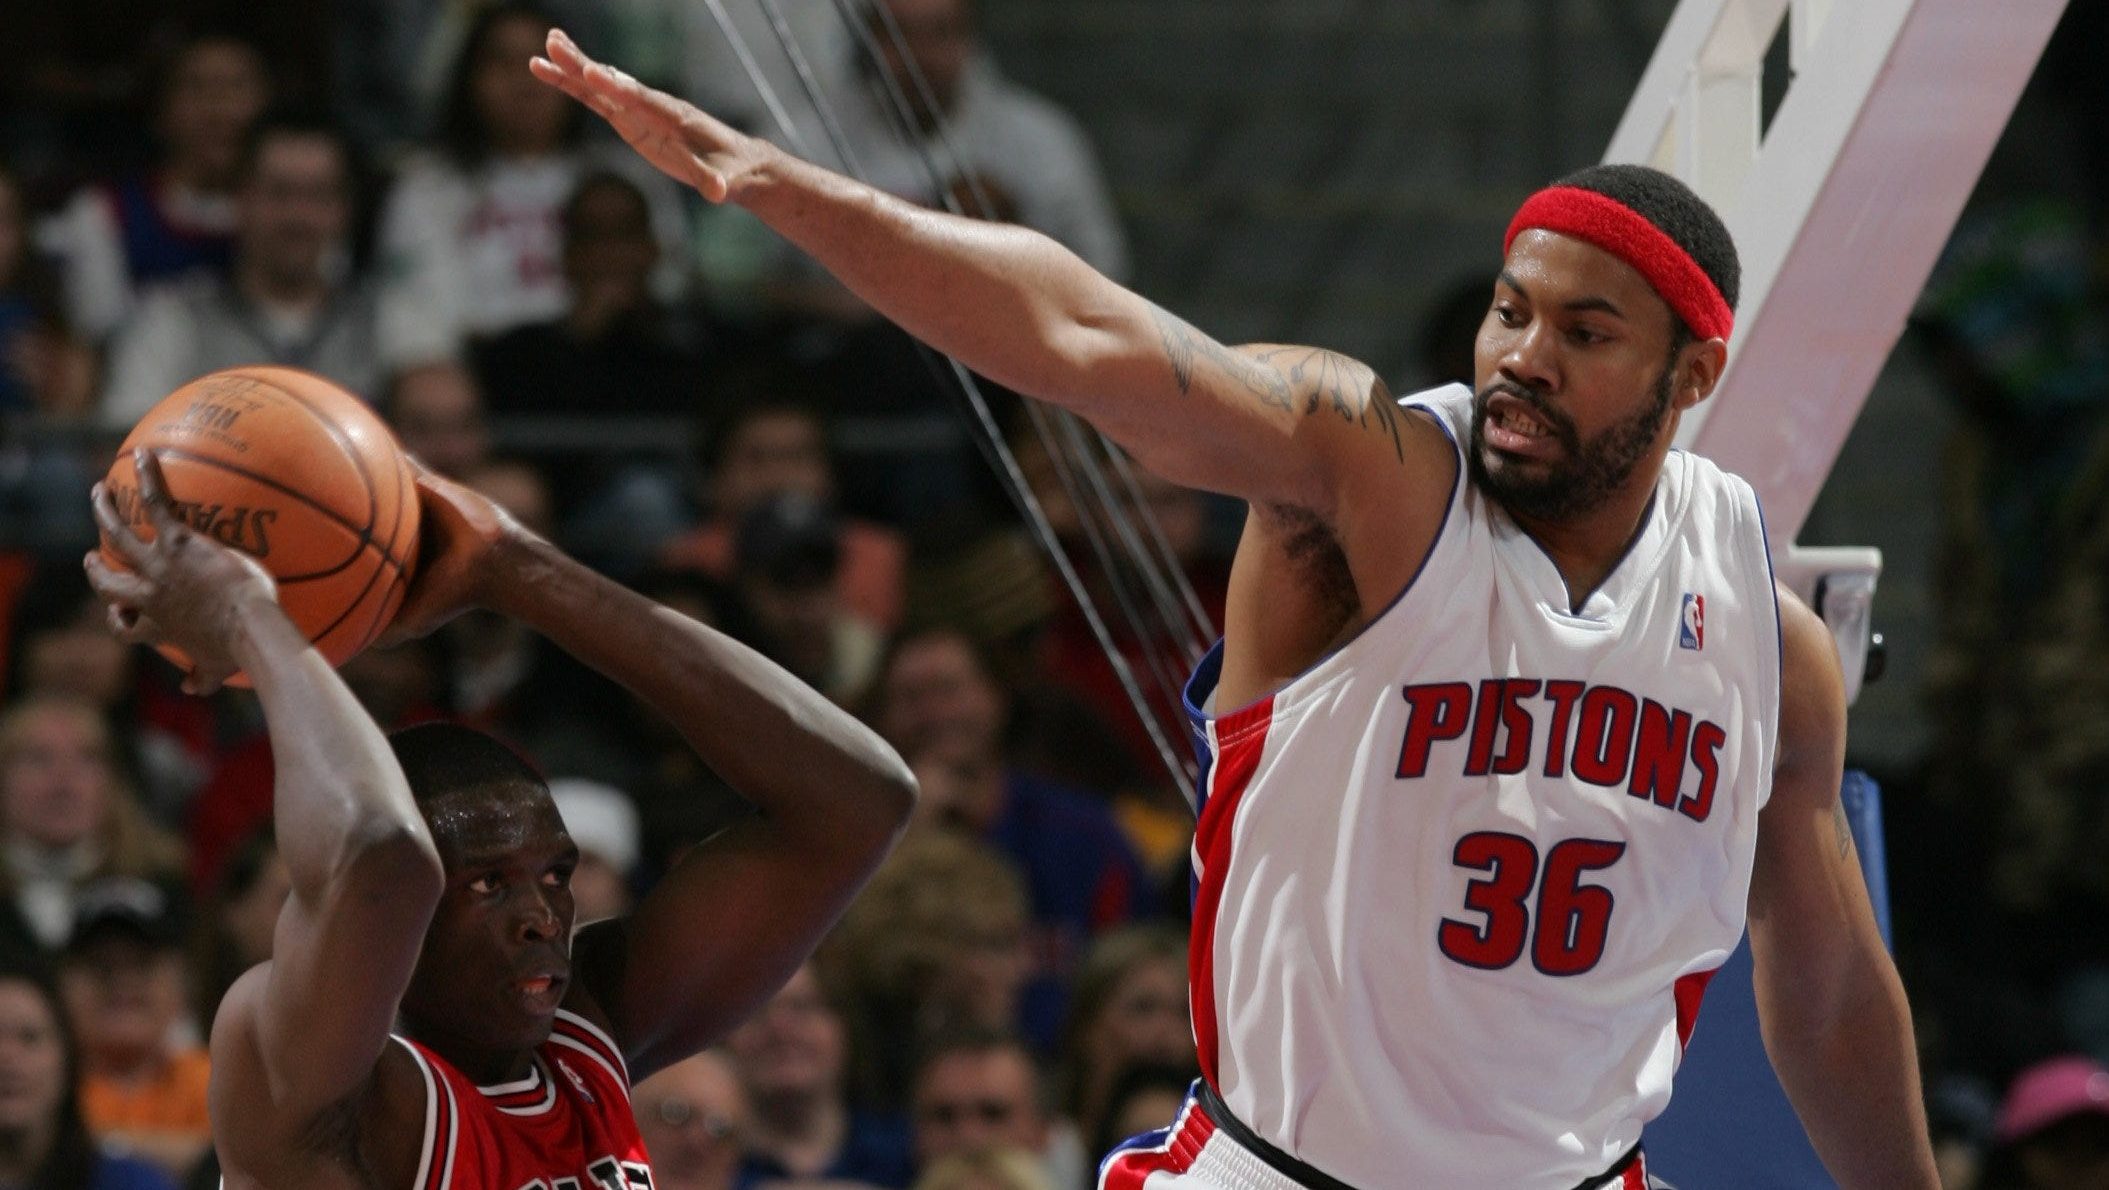 Rasheed Wallace: Pistons' legend no longer with Lakers